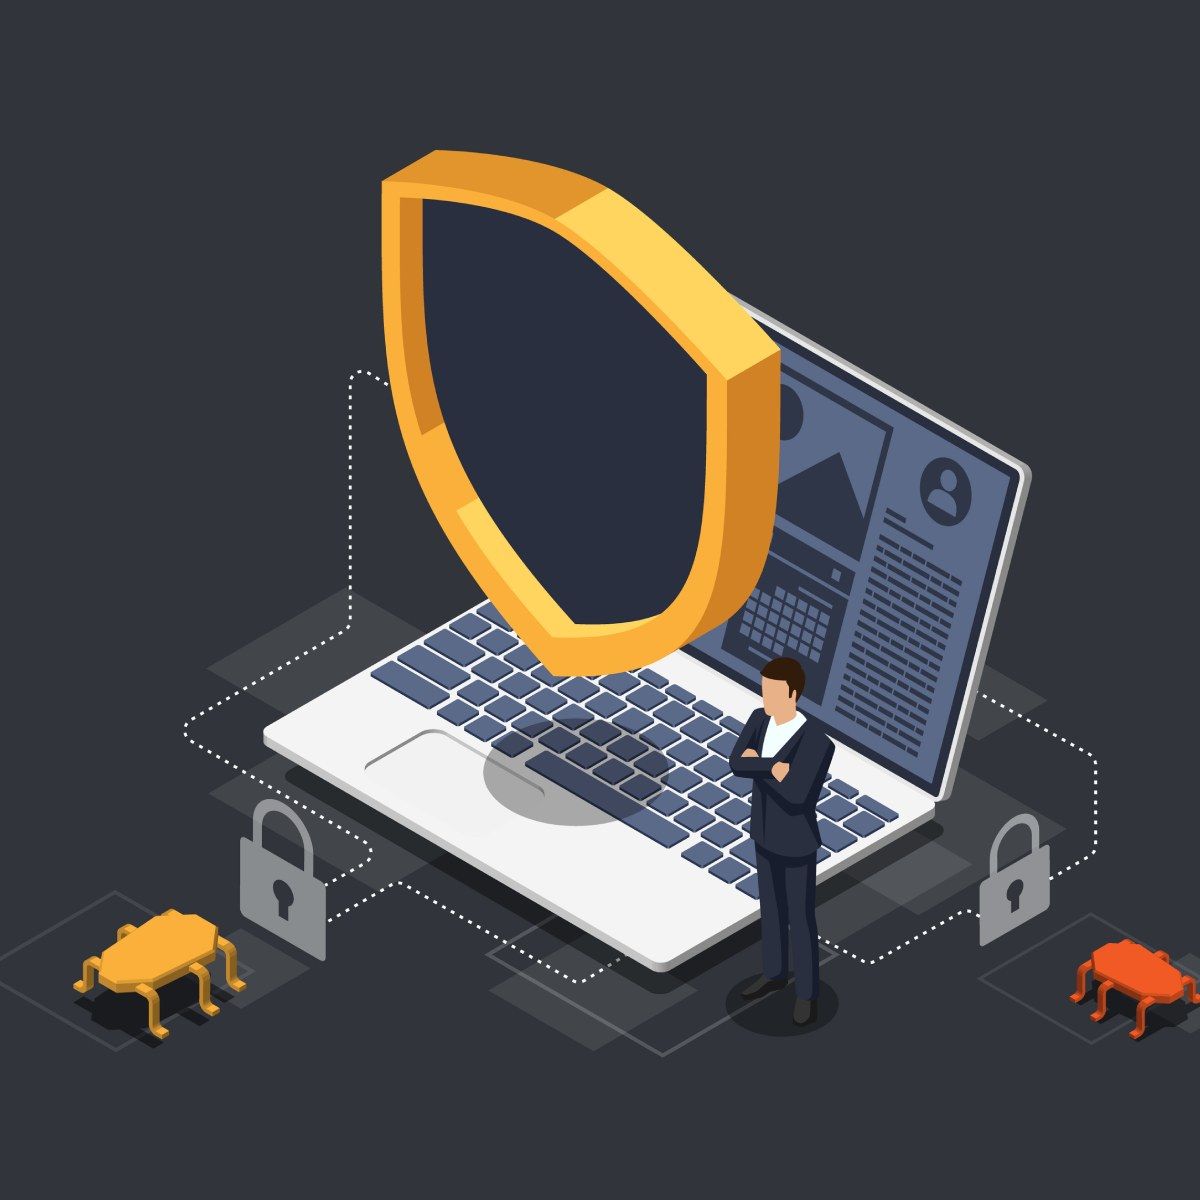 An illustration of an open laptop with a yellow and black shield floating above it while bugs try to attack it